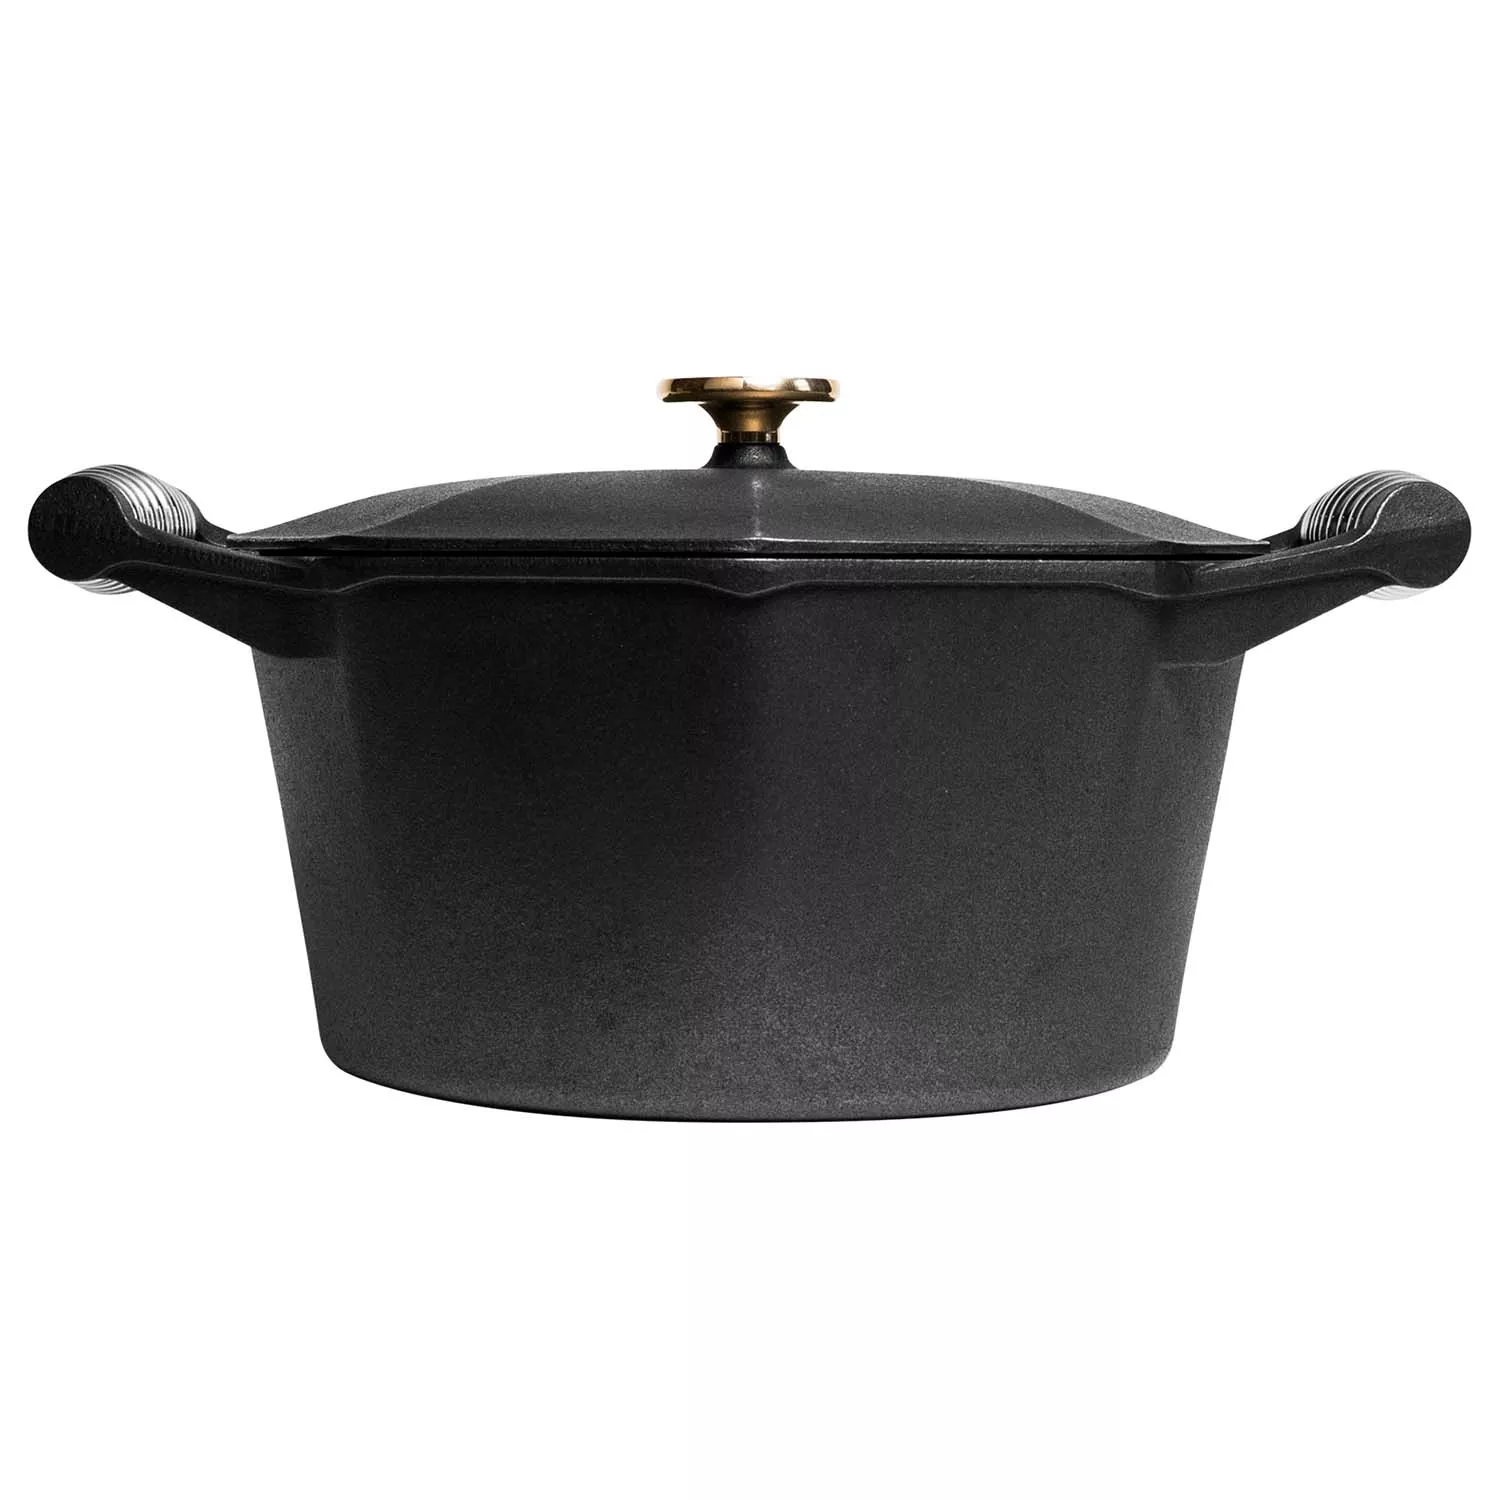 Finex 10 Cast Iron Skillet with Lid + Reviews